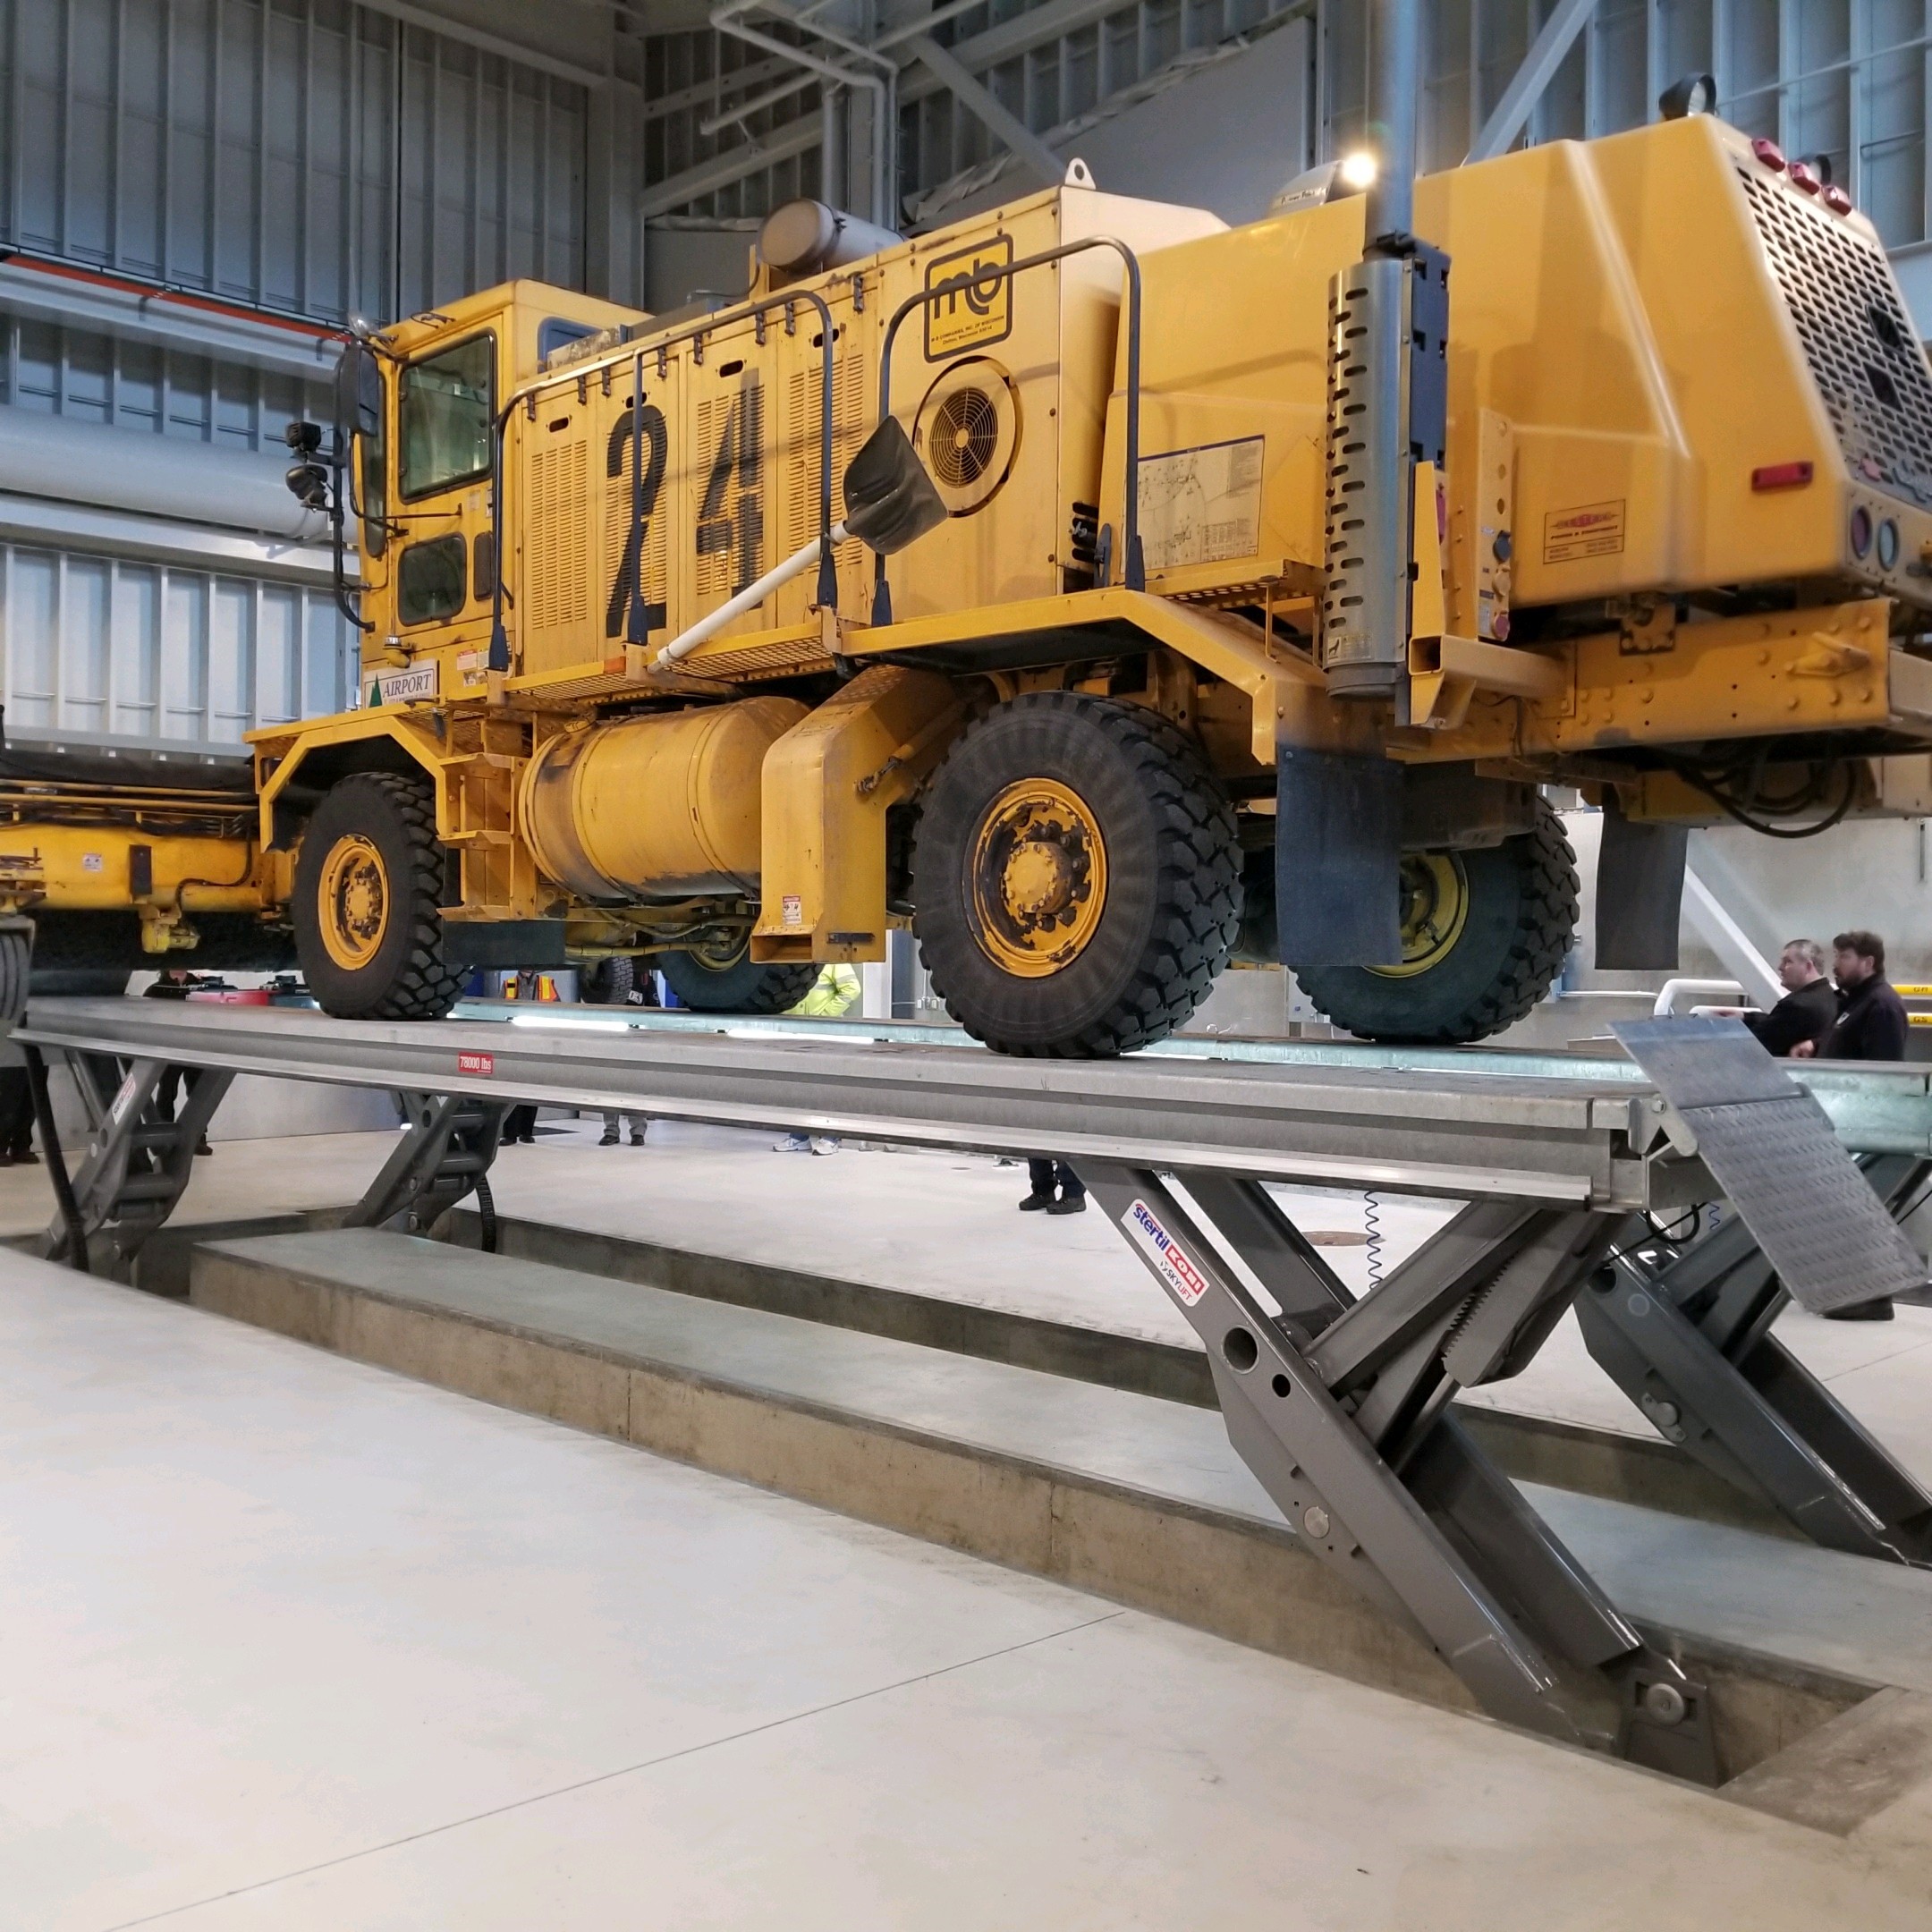 Large maintenance facilities increasingly turn to water-resistant vehicle lifting systems, such as the Stertil-Koni SKYLIFT Wash Bay, to clean their fleets